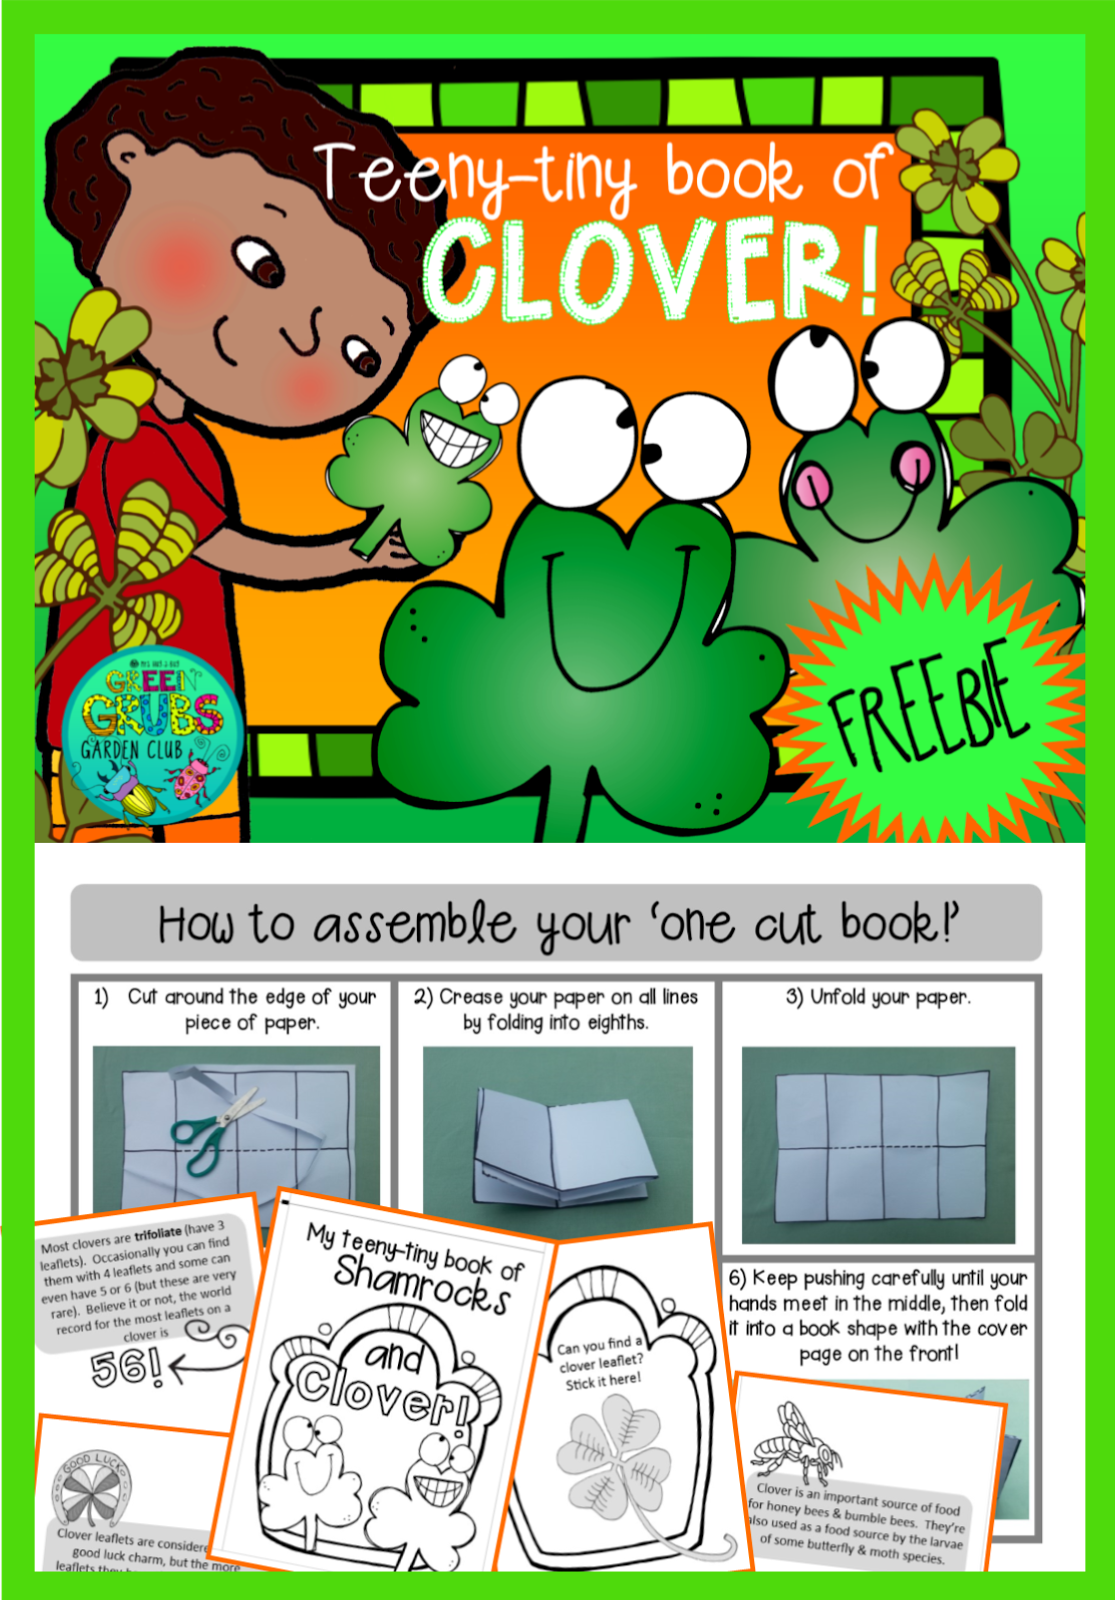 St Paddy’s day clover hunt! ~FREE PRINTABLE~